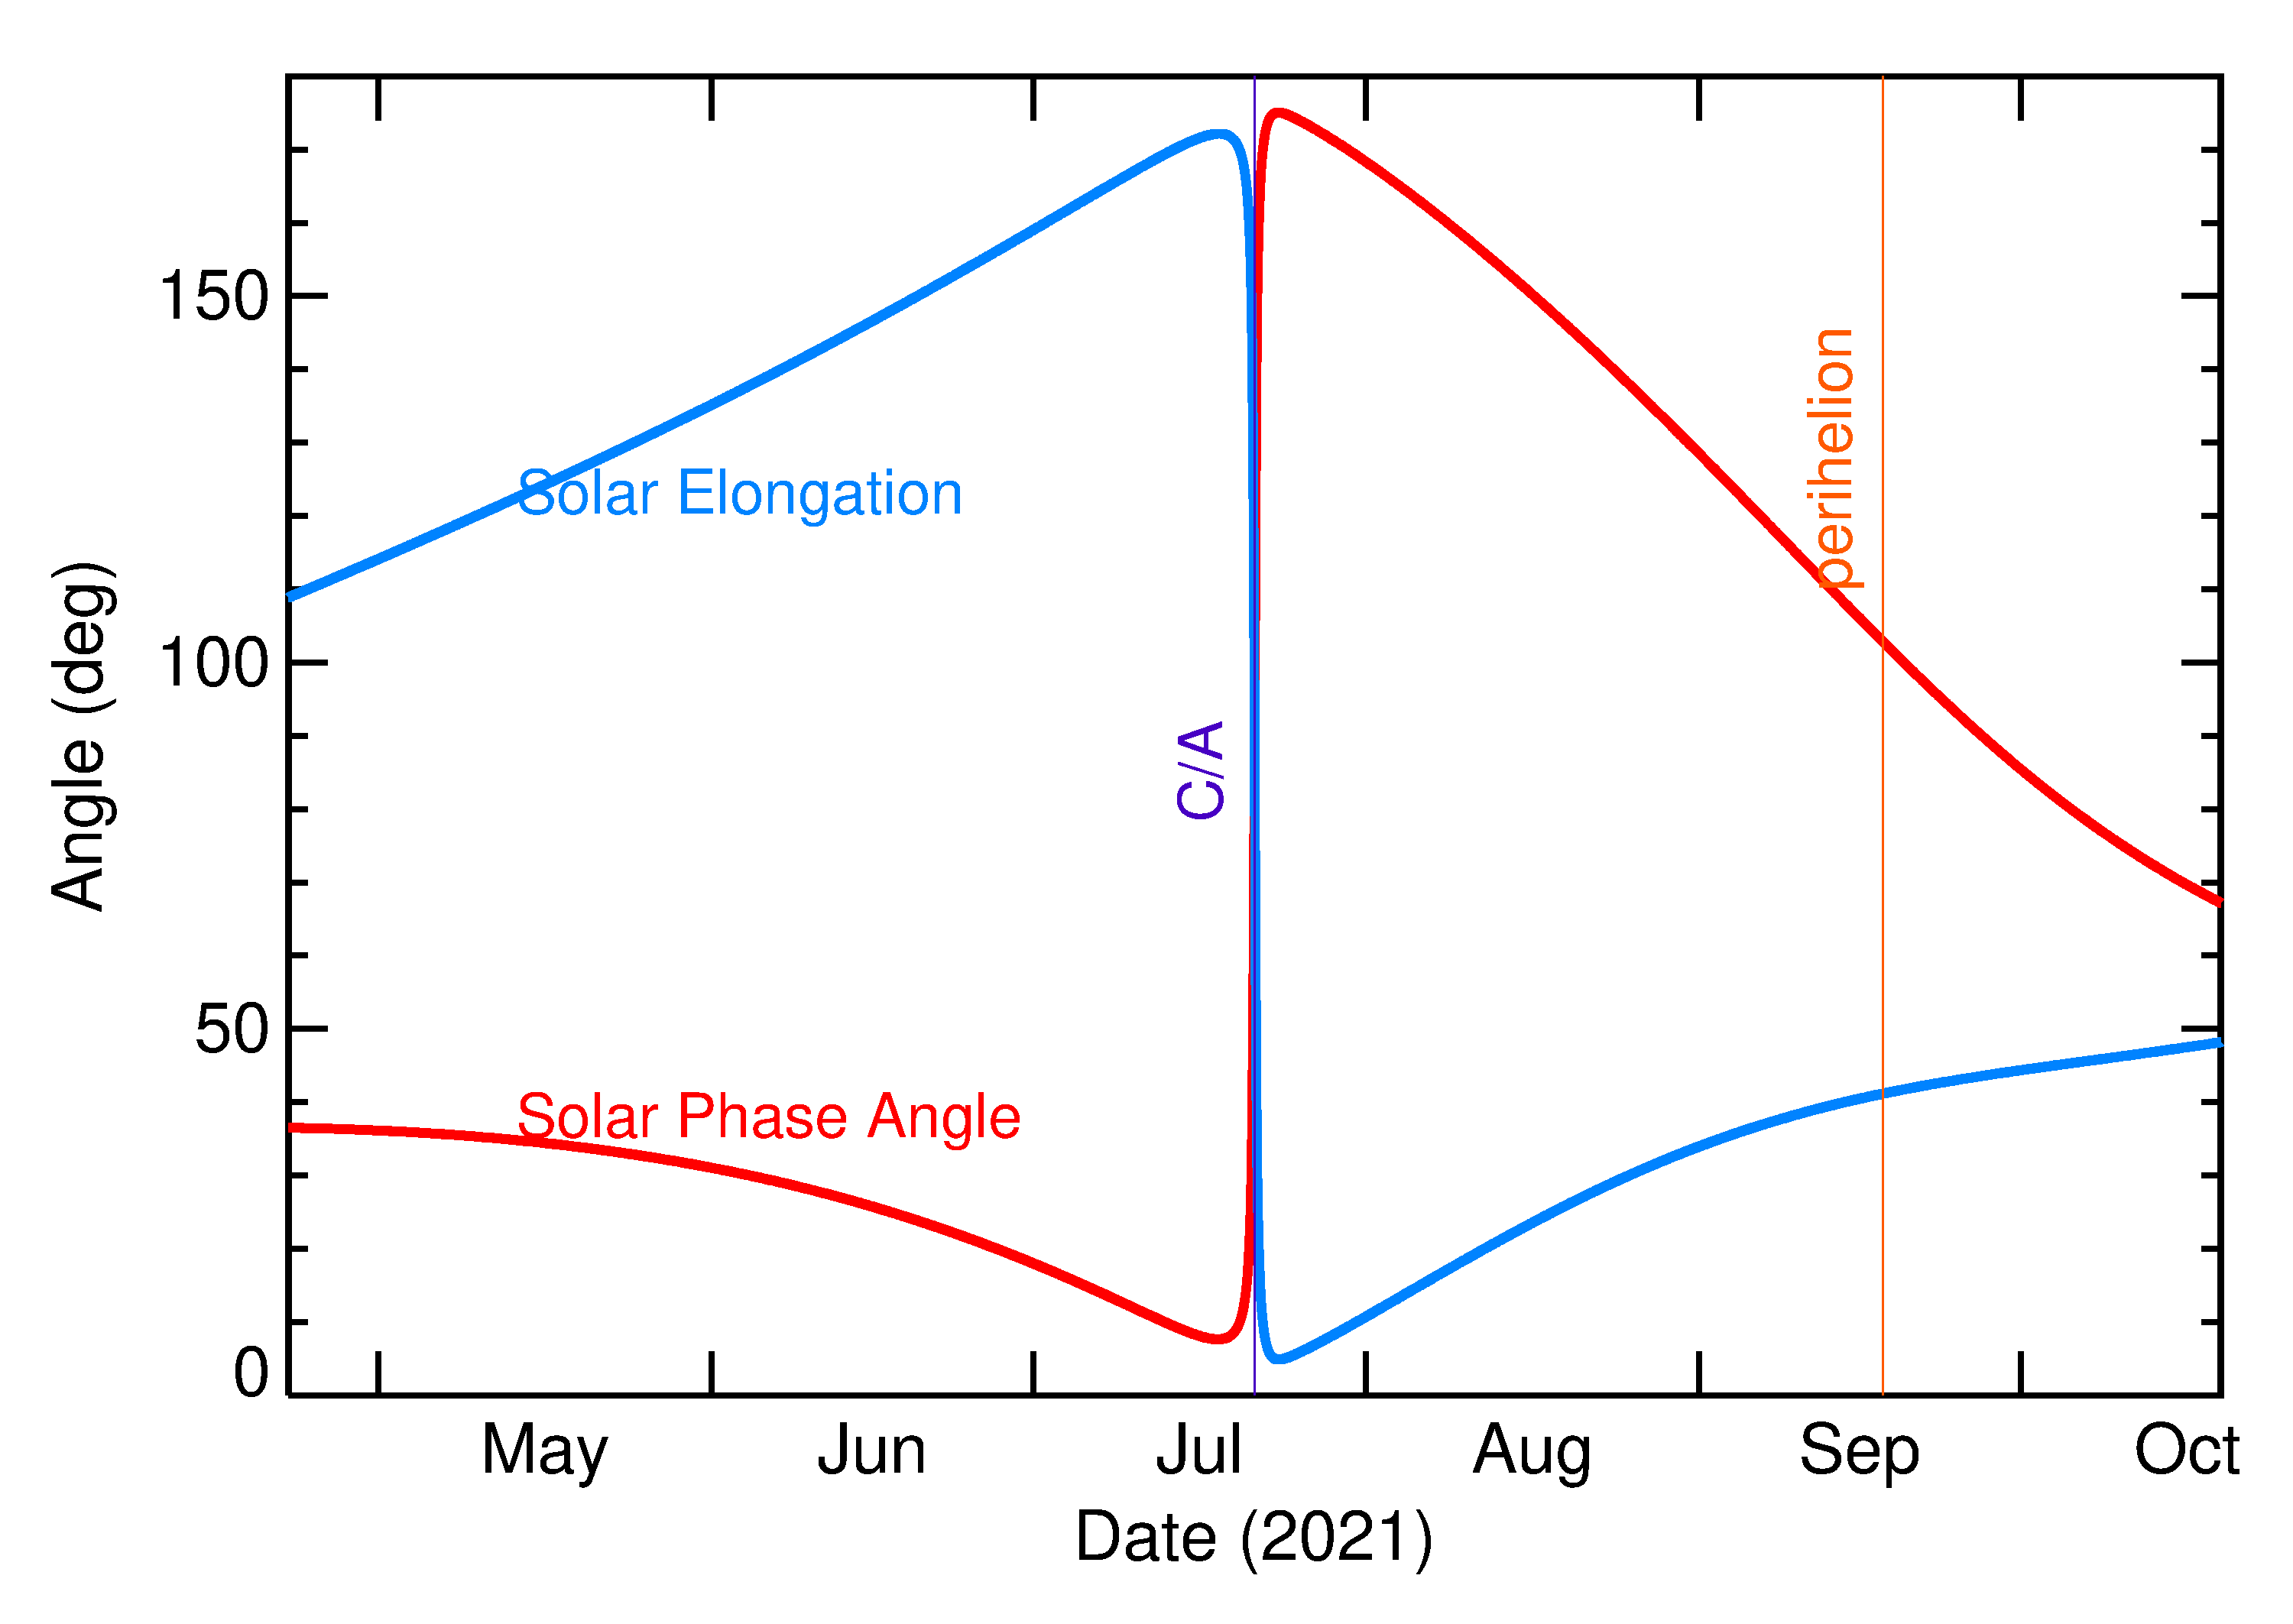 Solar Elongation and Solar Phase Angle of 2021 OV in the months around closest approach